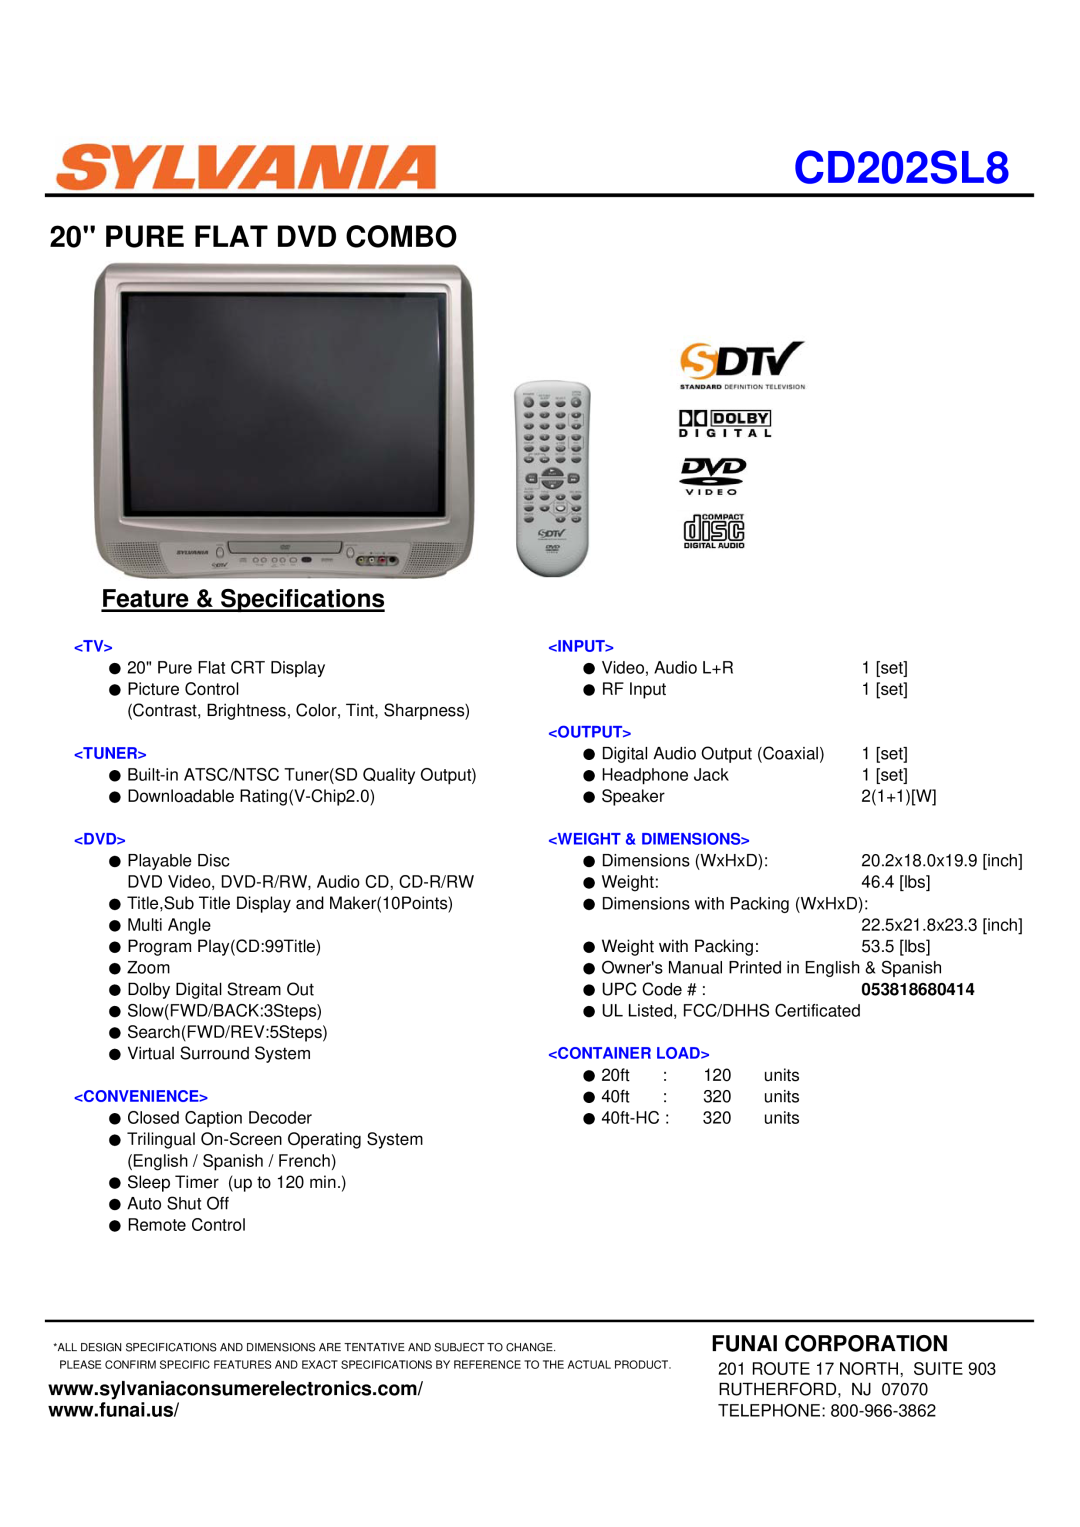 Sylvania CD202SL8 specifications Pure Flat Dvd Combo, Feature & Specifications, Funai Corporation, Tuner, Convenience 